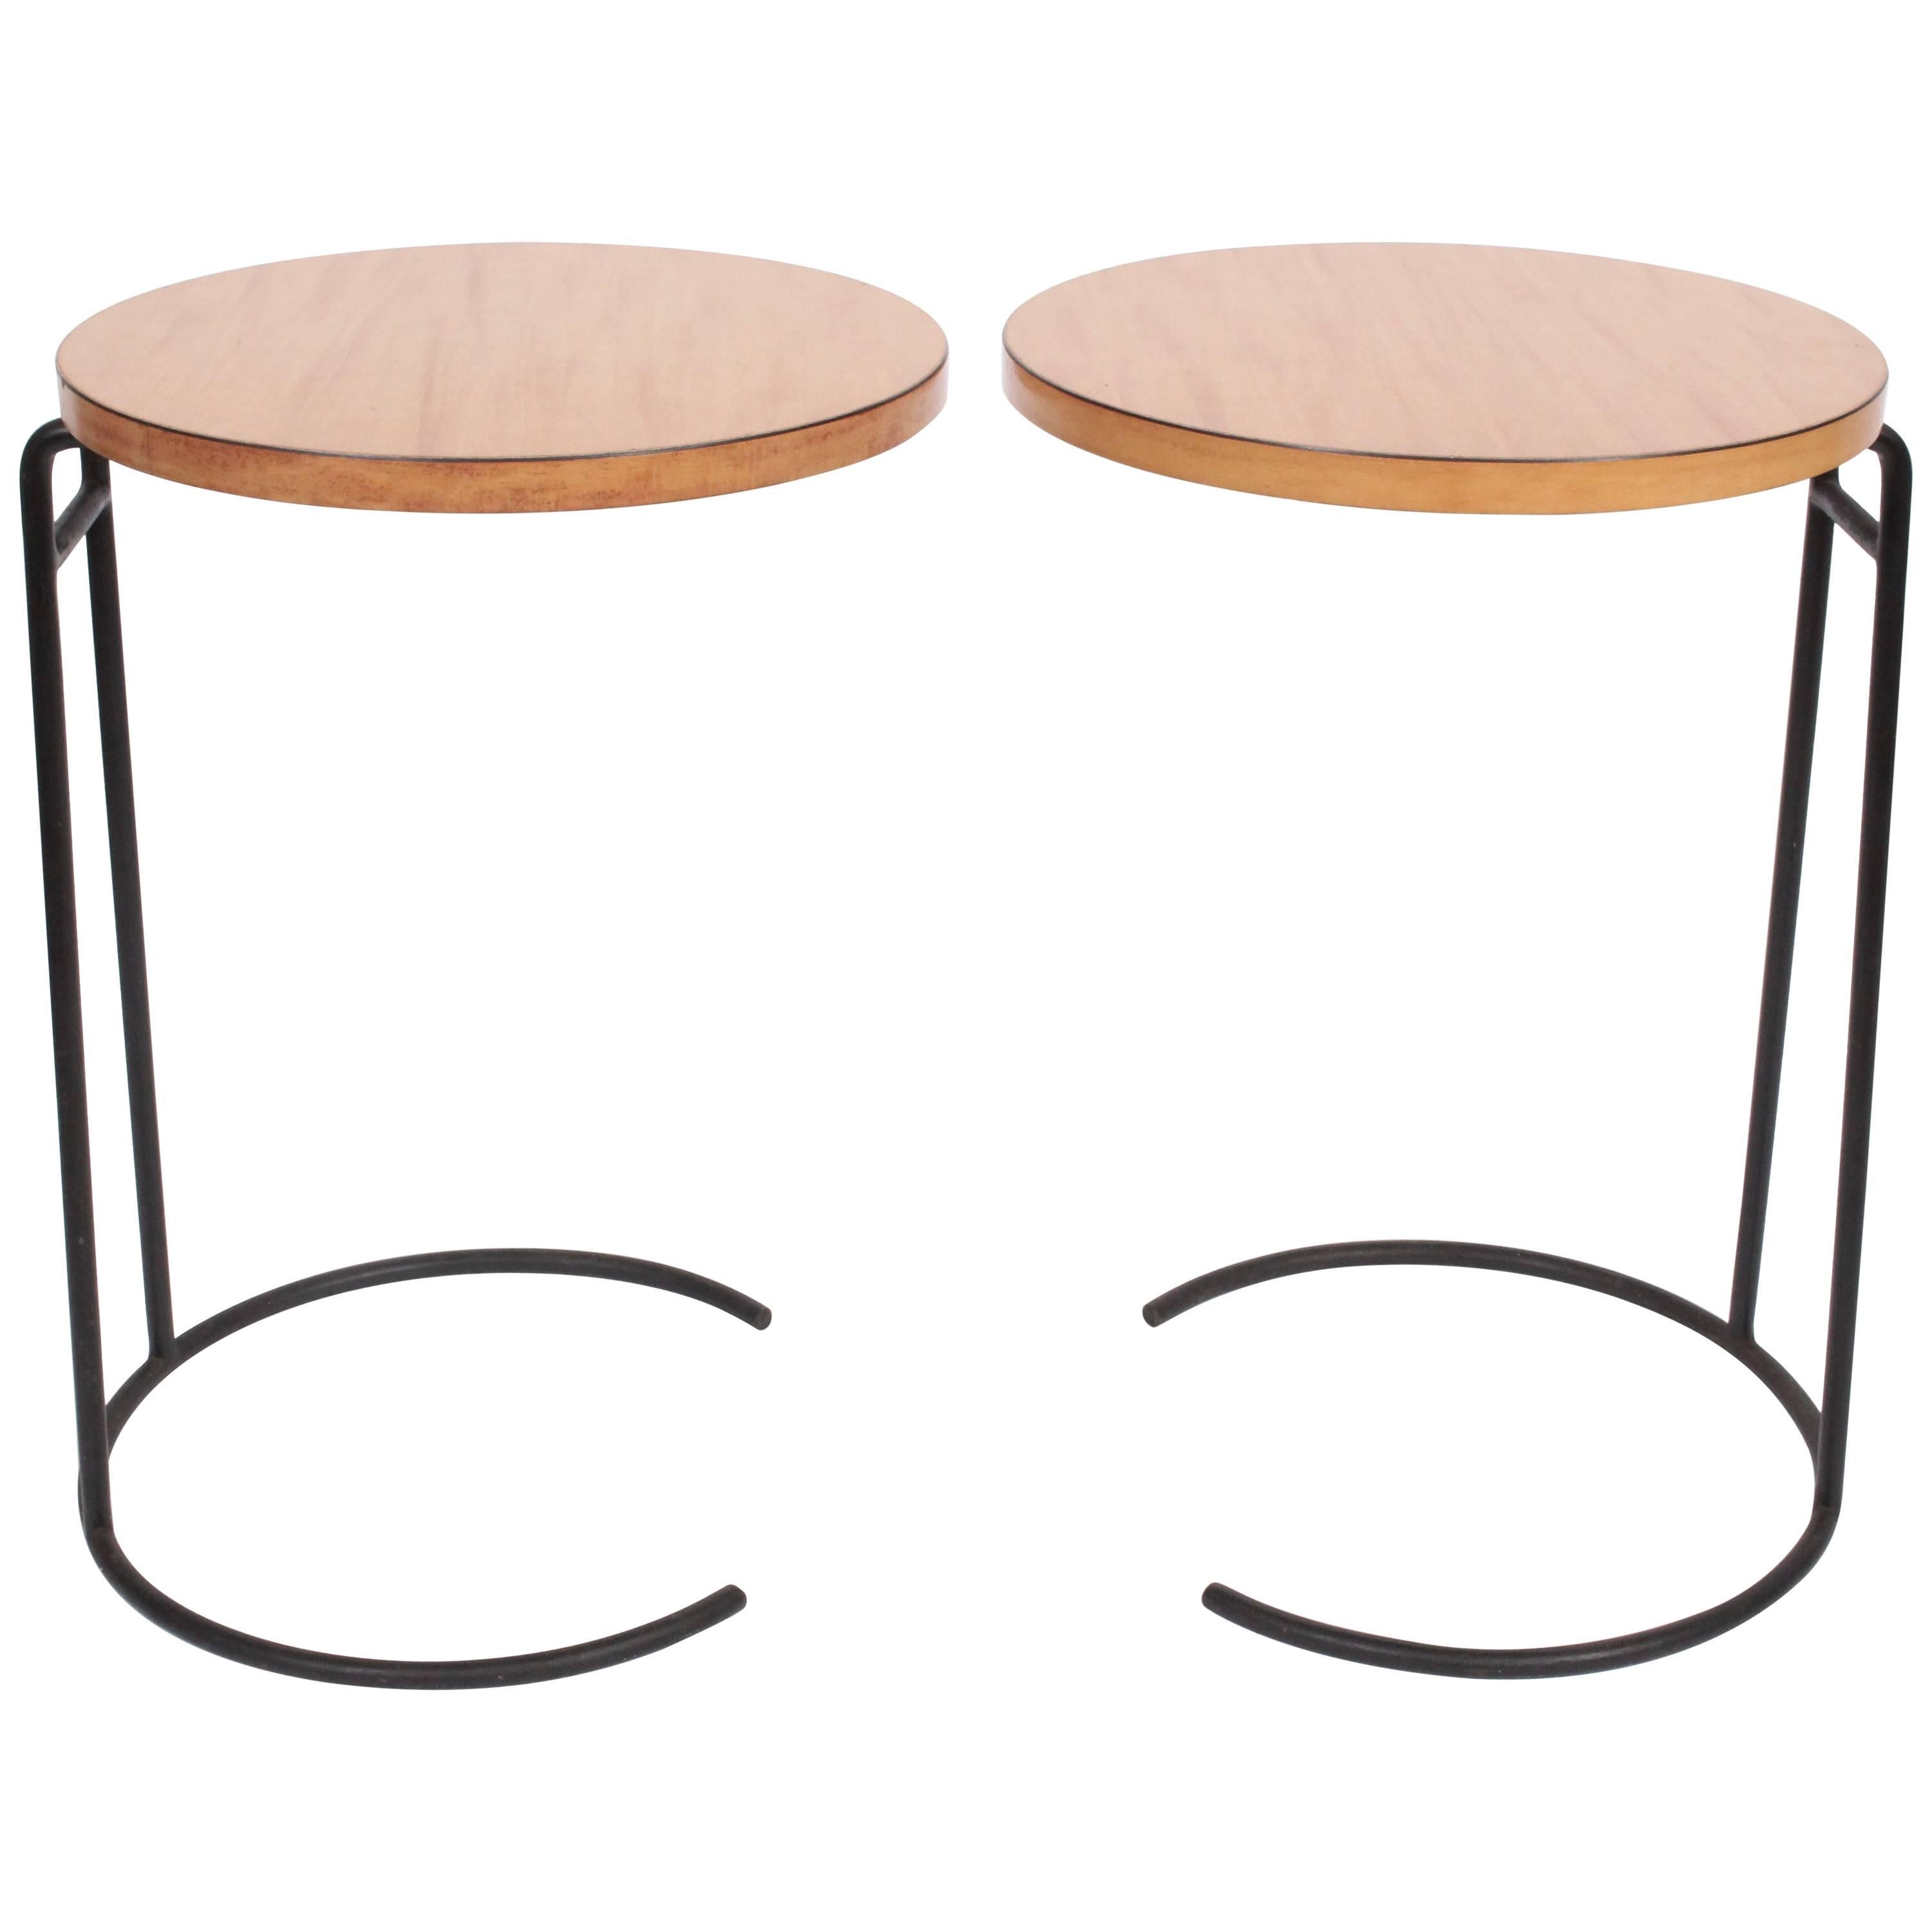 Pair of Jens Risom T-710 Small Side Tables, circa 1950s